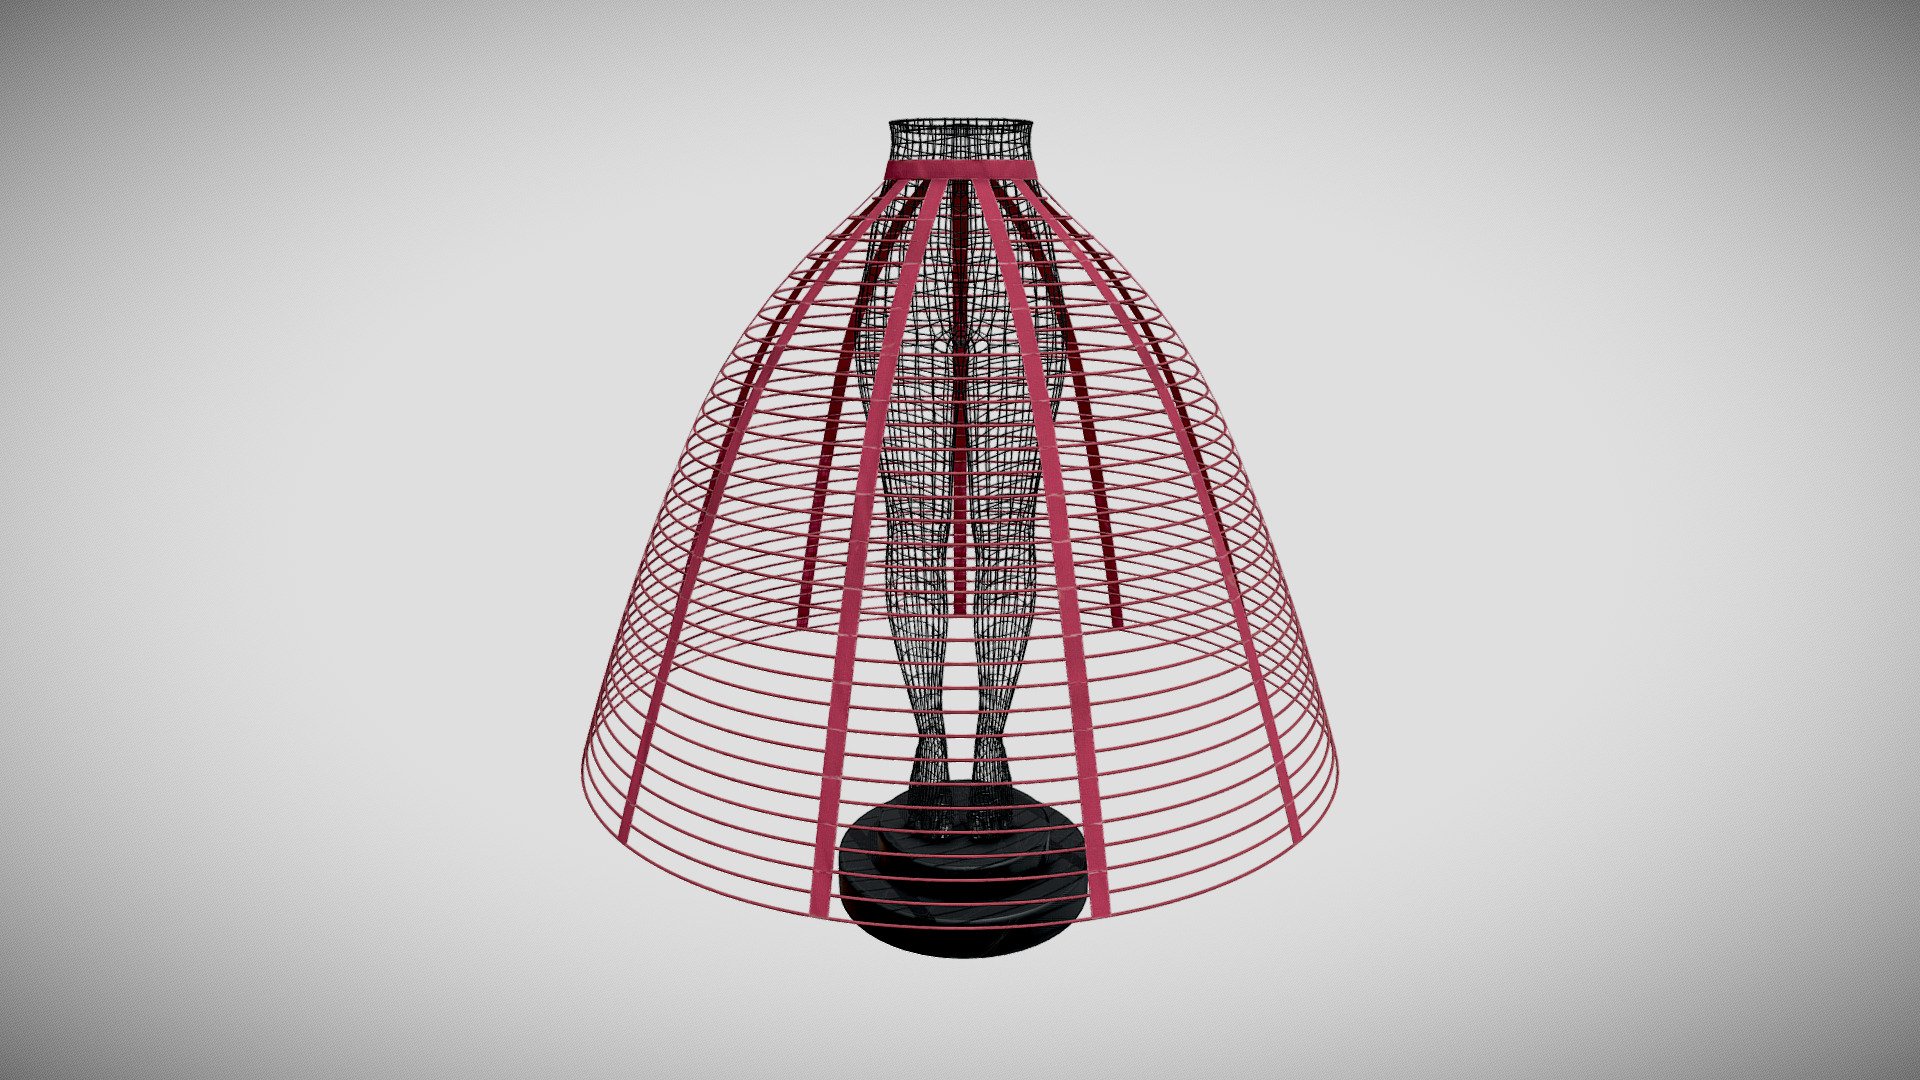 The 3D model presents a digital reconstruction of a historical crinoline - a special framework used to expand the fullness of the skirt in the mid 19th century. The crinoline is presented in a historical photograph. It has 32 hoops and 11 ribbons. A new method of parameterisation was applied to reproduce the shape and construction of the hoops, ribbons and belt (for further details see https://doi.org/10.1080/00405000.2019.1621042). The authors of the 3D model are

Aleksei Moskvin https://independent.academia.edu/AlekseiMoskvin

Mariia Moskvina https://independent.academia.edu/MariiaMoskvina

(Saint Petersburg State University of Industrial Technologies and Design)

DOI: http://dx.doi.org/10.13140/RG.2.2.28510.56649

The authors thank Prof. Victor Kuzmichev from Ivanovo State Polytechnic University for his important contribution to this reconstruction 3d model